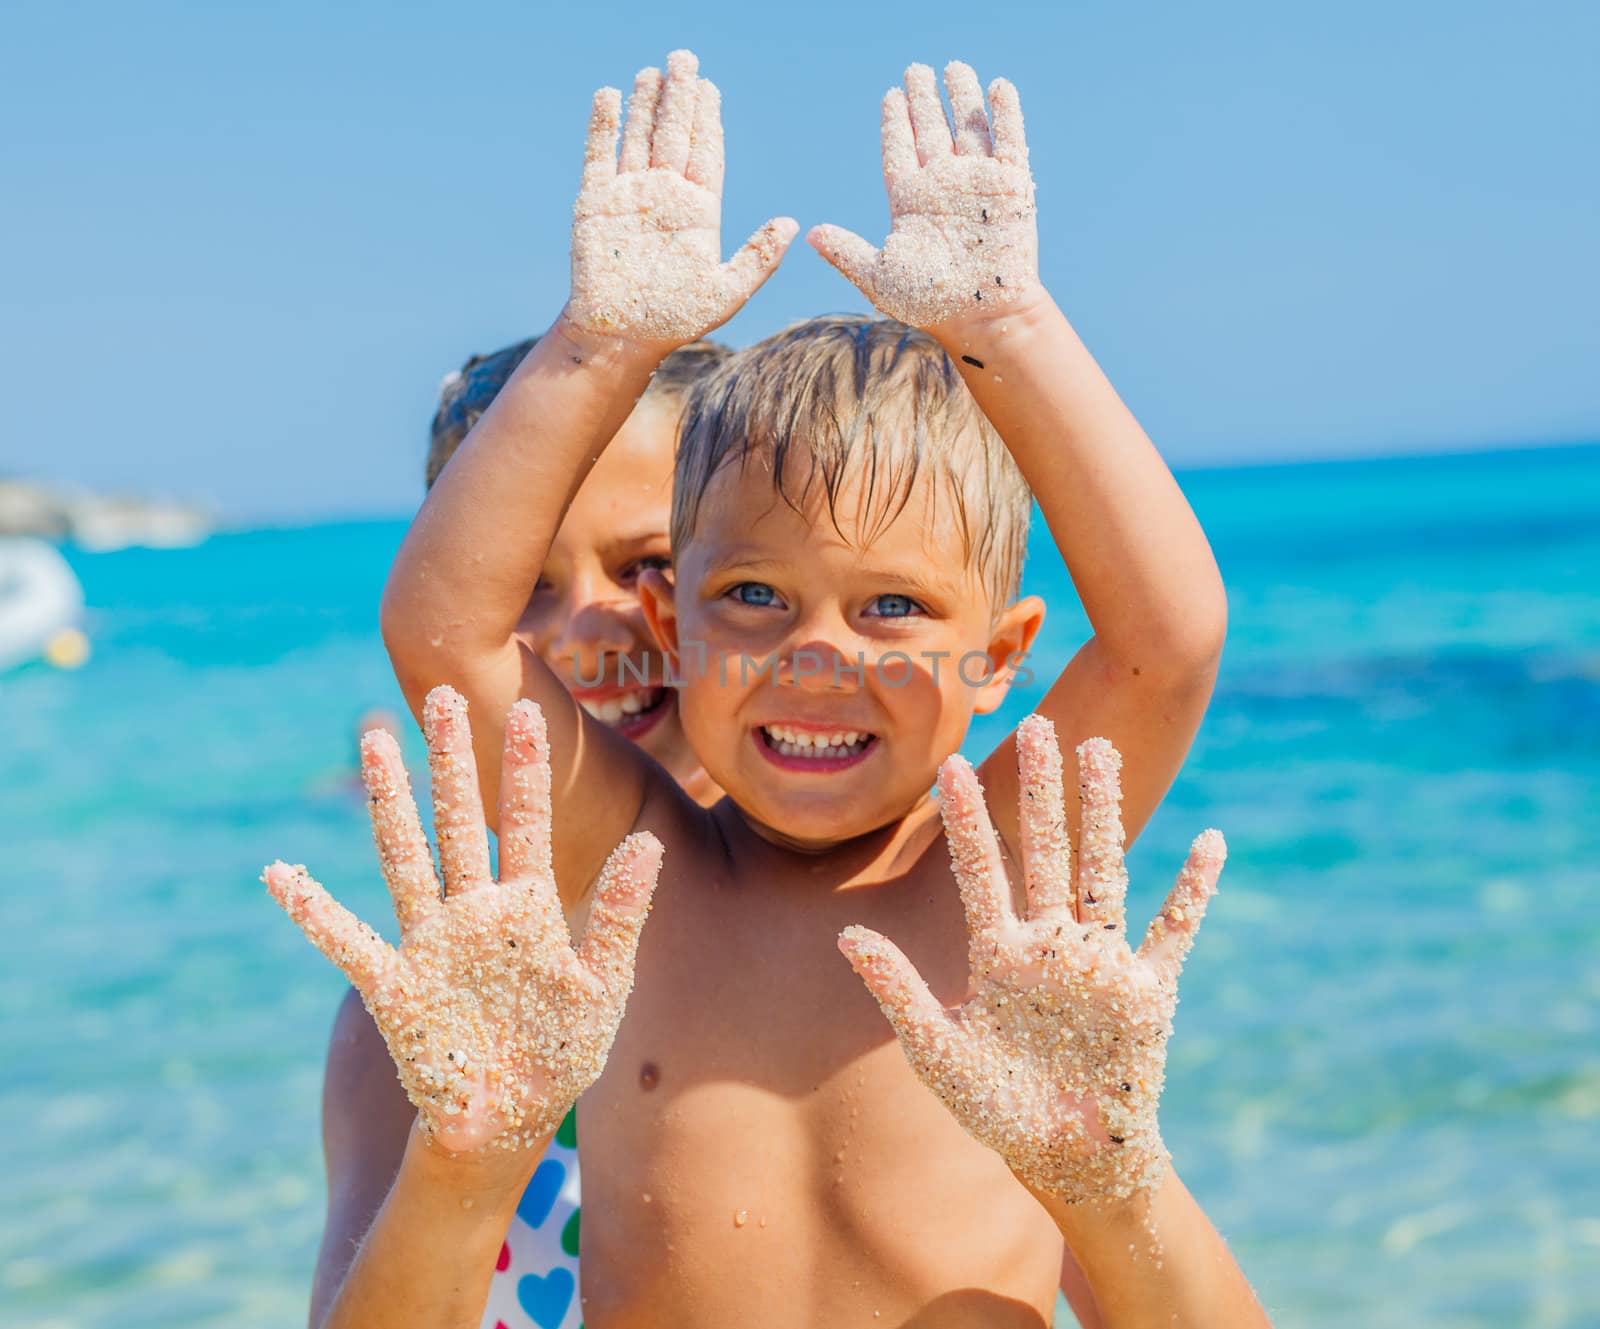 Close-up view of hands by the girl and boy on the sand beach.